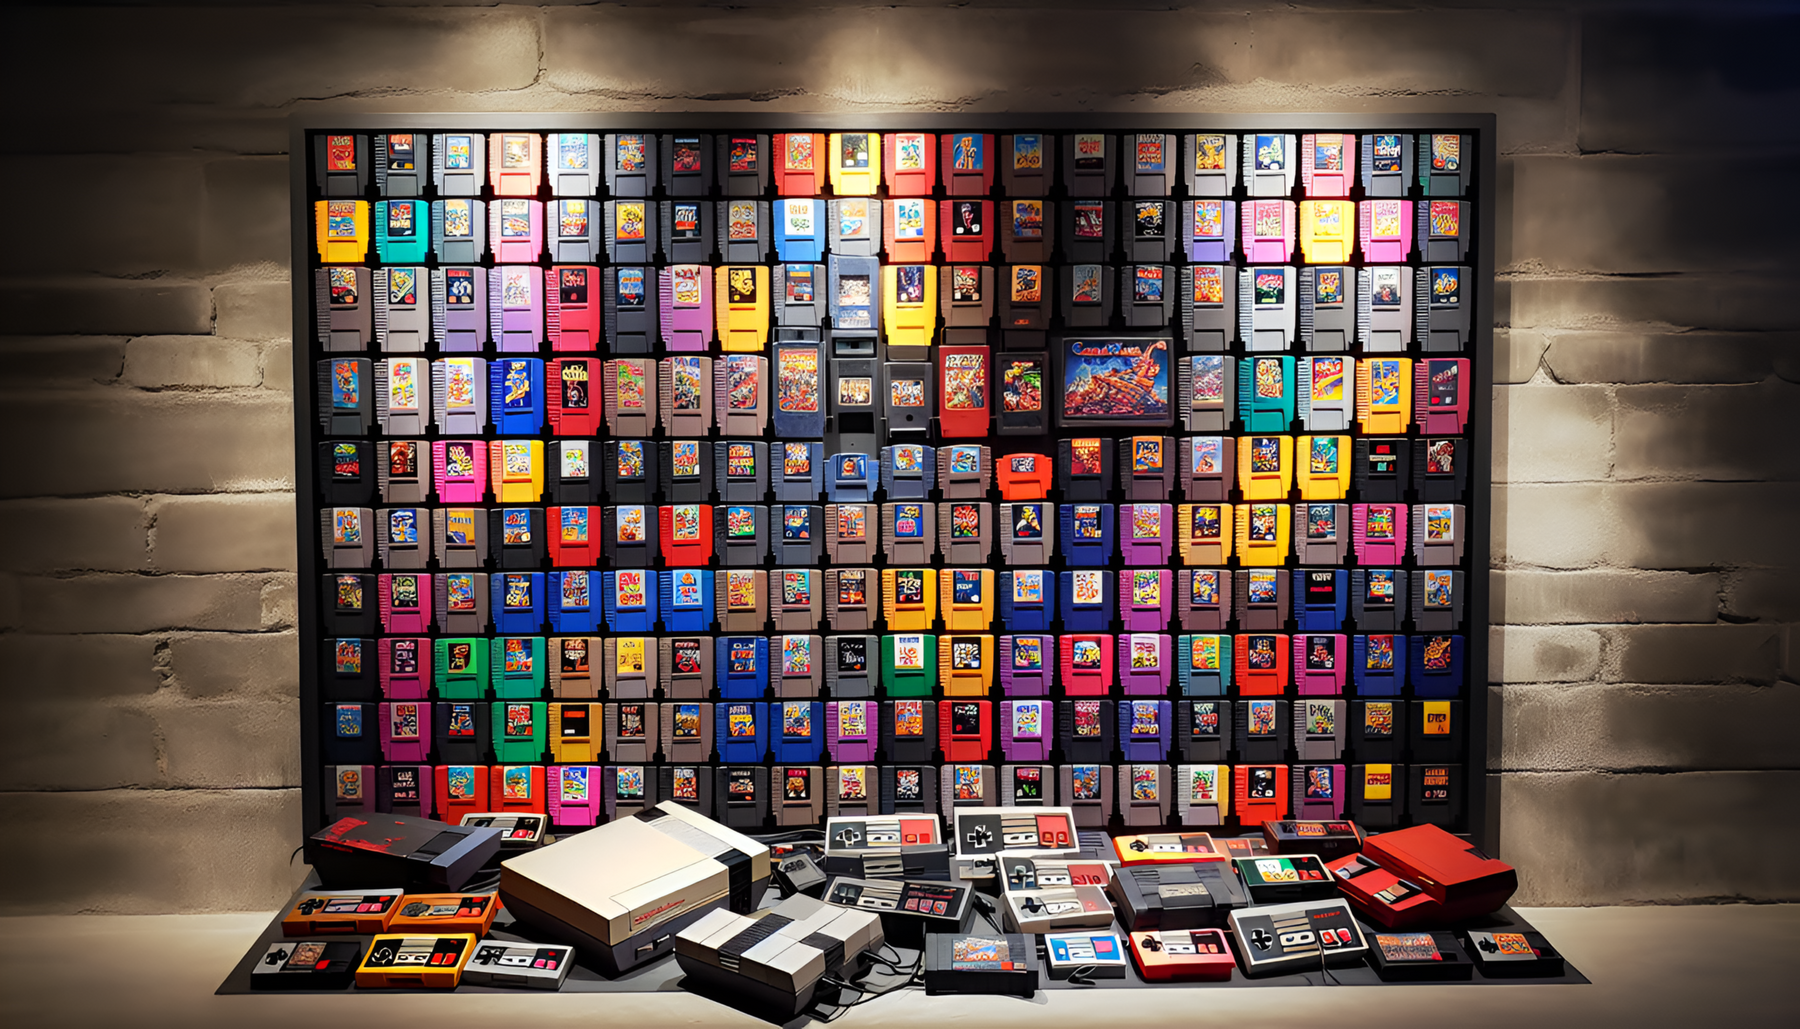 An enchanting image of a pristine collection of vibrantly colored, vintage video game cartridges, carefully arranged against a retro gaming console backdrop, sparking nostalgia for the pixelated adventures of yesteryears.